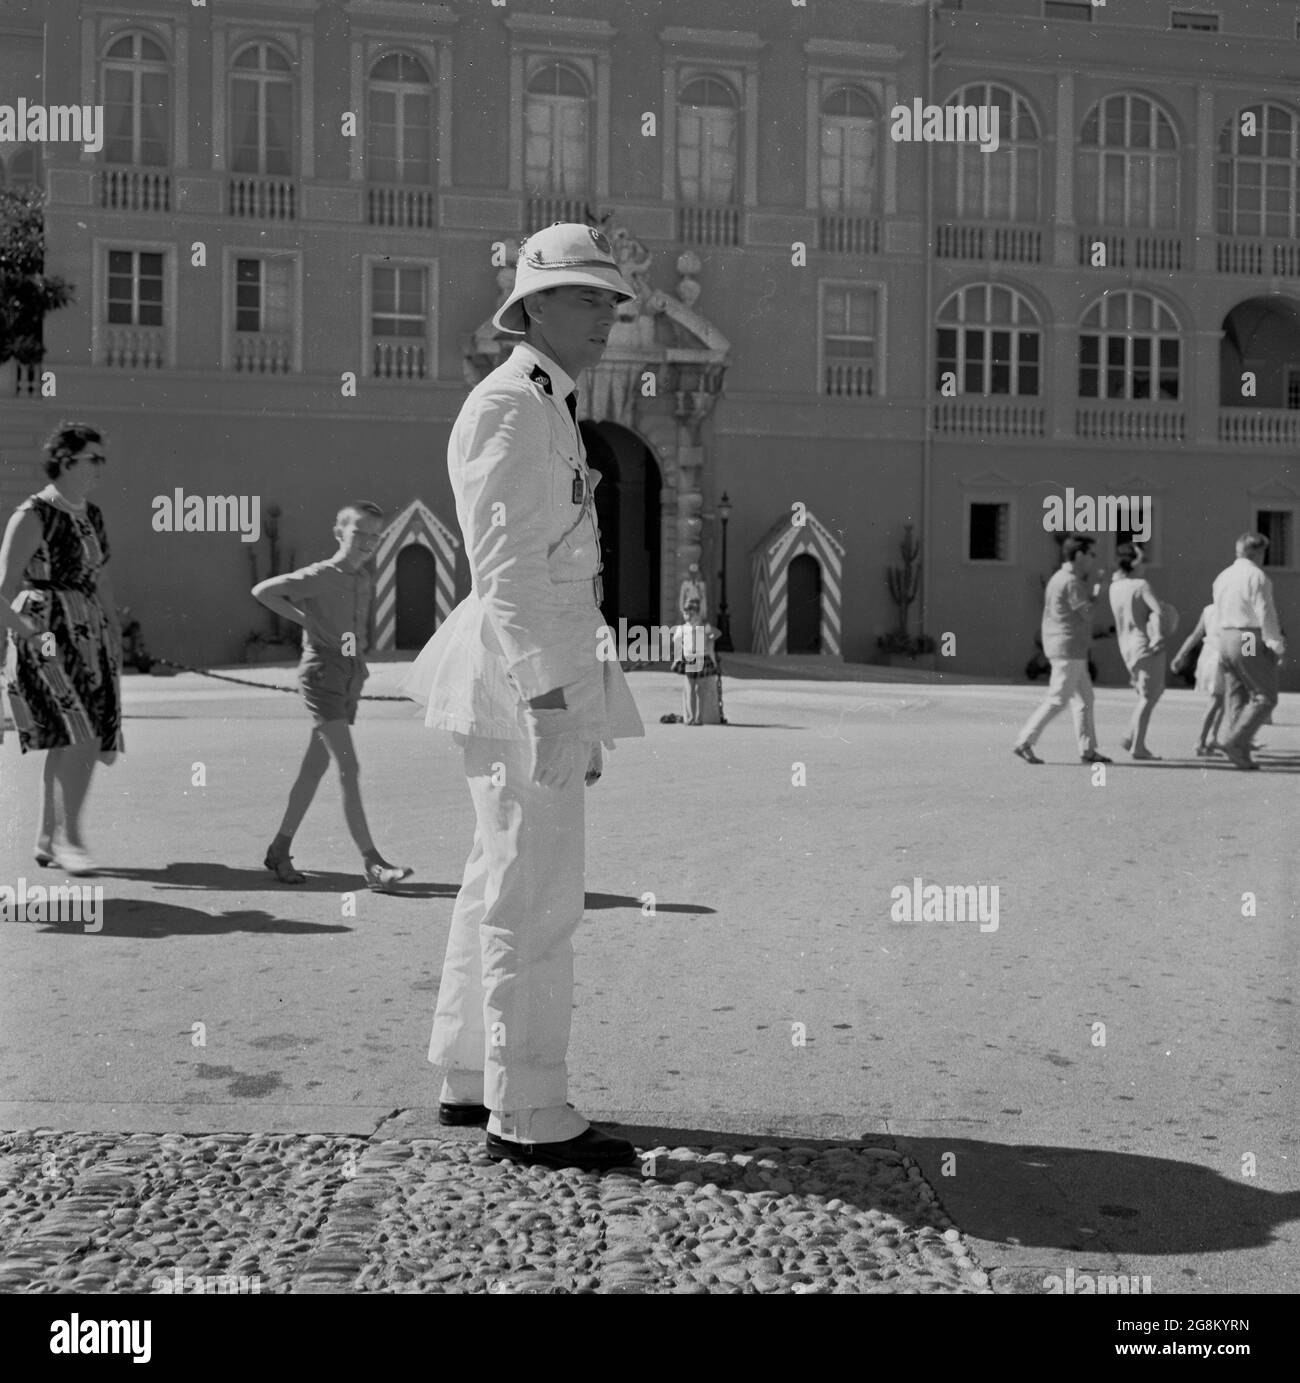 1950s, historical, Monaco, a uniformed guard outside Princes' Palace, the official residence of the Soverign Prince of Monaco. Built in 1191, it was captured in 1297 by the Grimaldi famliy who have lived in the palace, save for the time when the Grimaldi's were in exile, ever since. The Palace Guards or the Carabiniers du Prince, were created in 1817 to provide 24 security for the Palace. They are highly trained French military men. Stock Photo